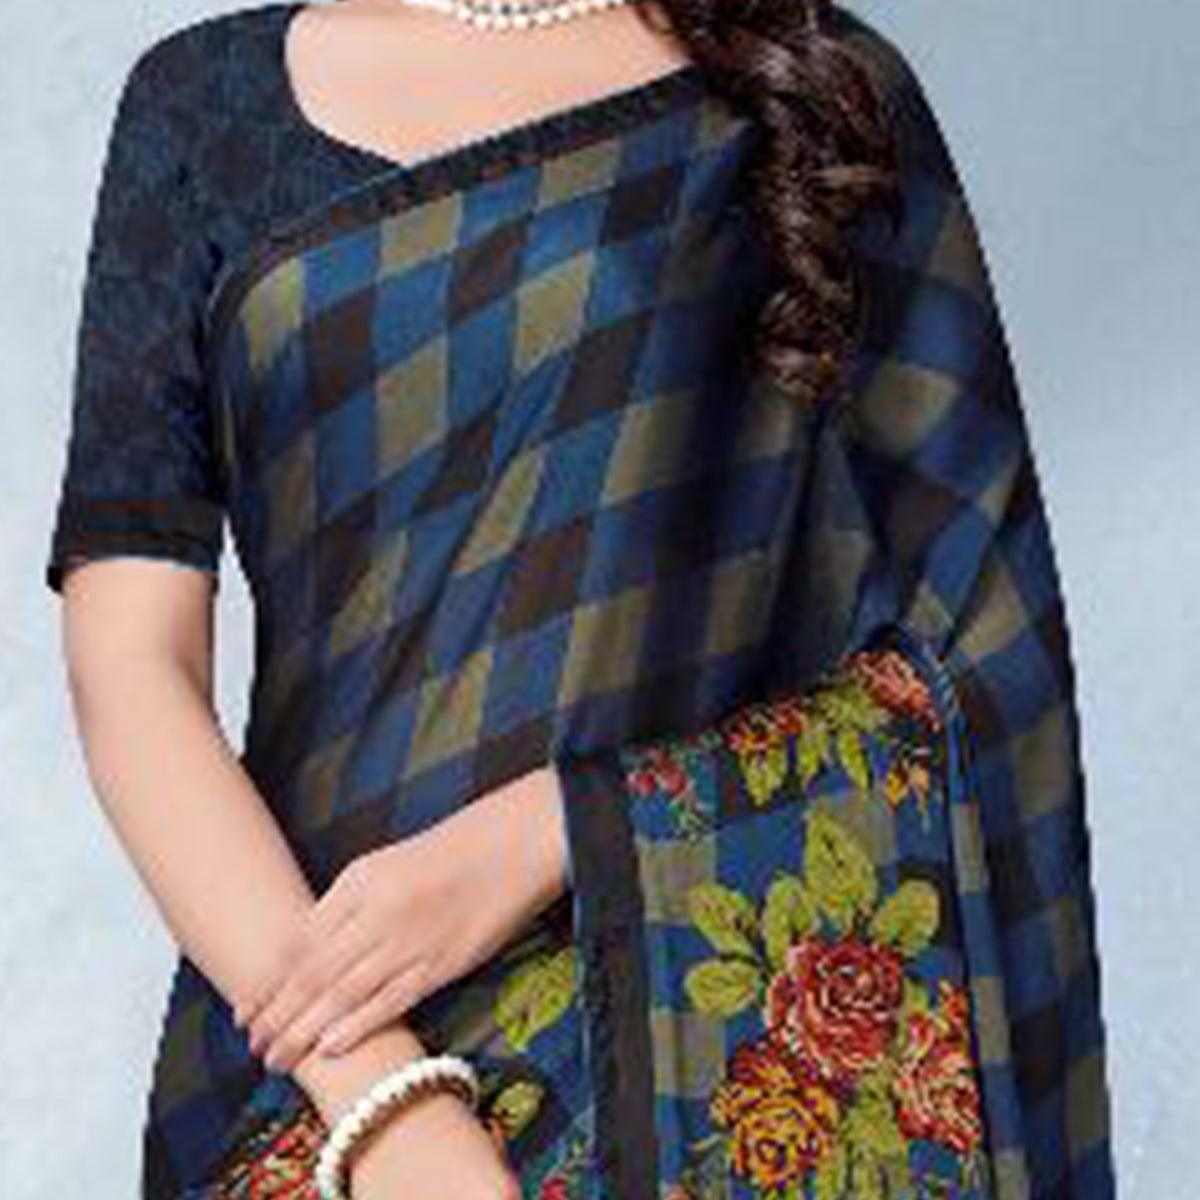 Prominent Navy Blue Colored Partywear Checkered Printed Chiffon Saree - Peachmode